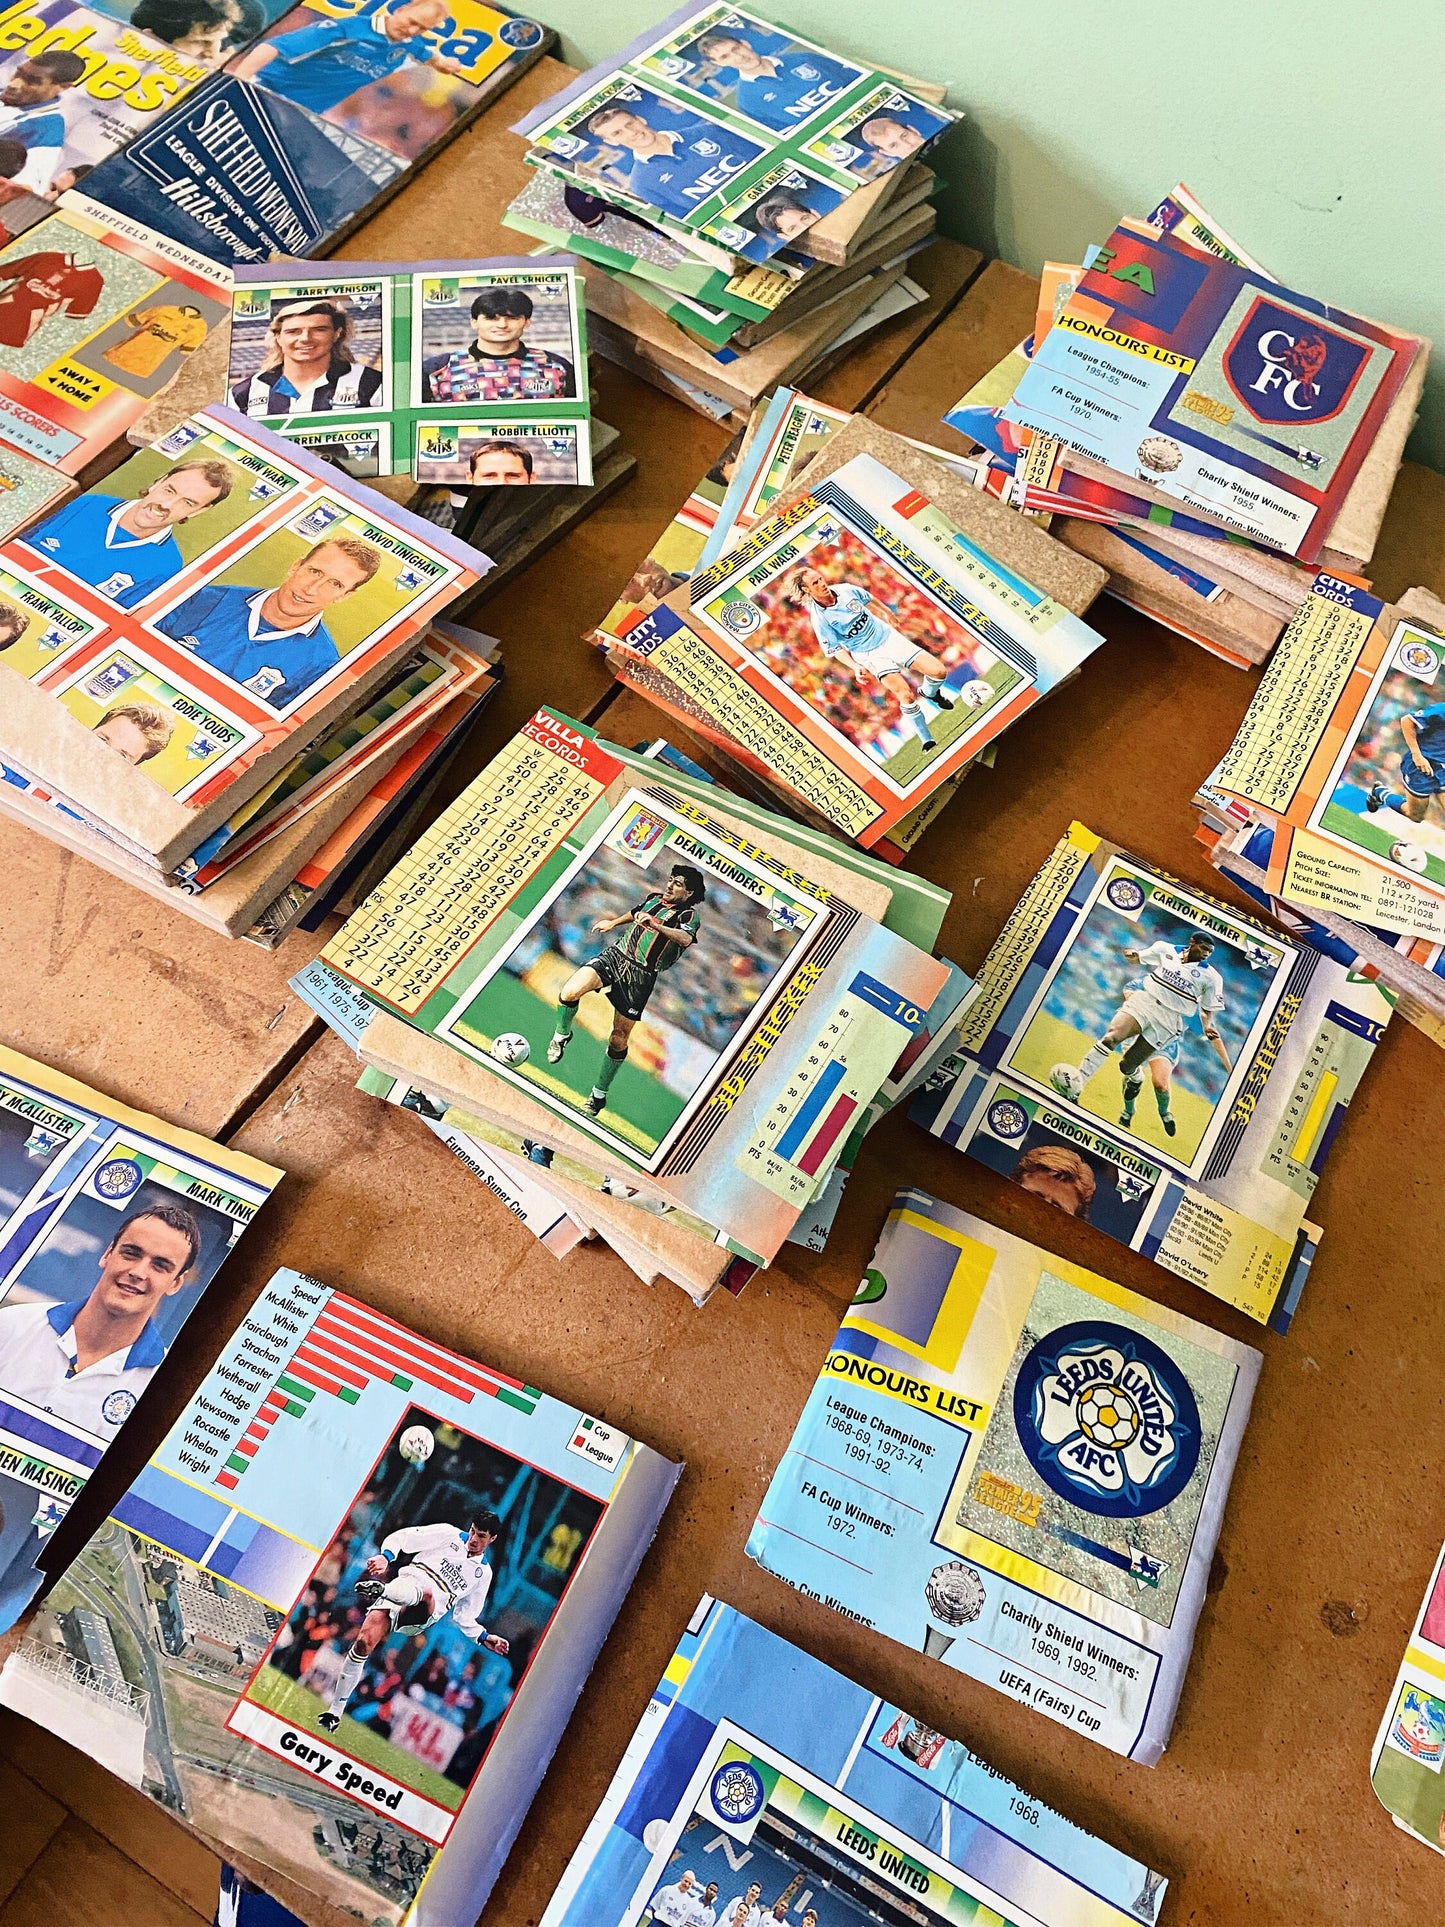 Vintage Sticker Book Norwich City Football Coasters. Upcycled Football Gift. Man Cave Home Decor. Retro Football Gift for Dad.